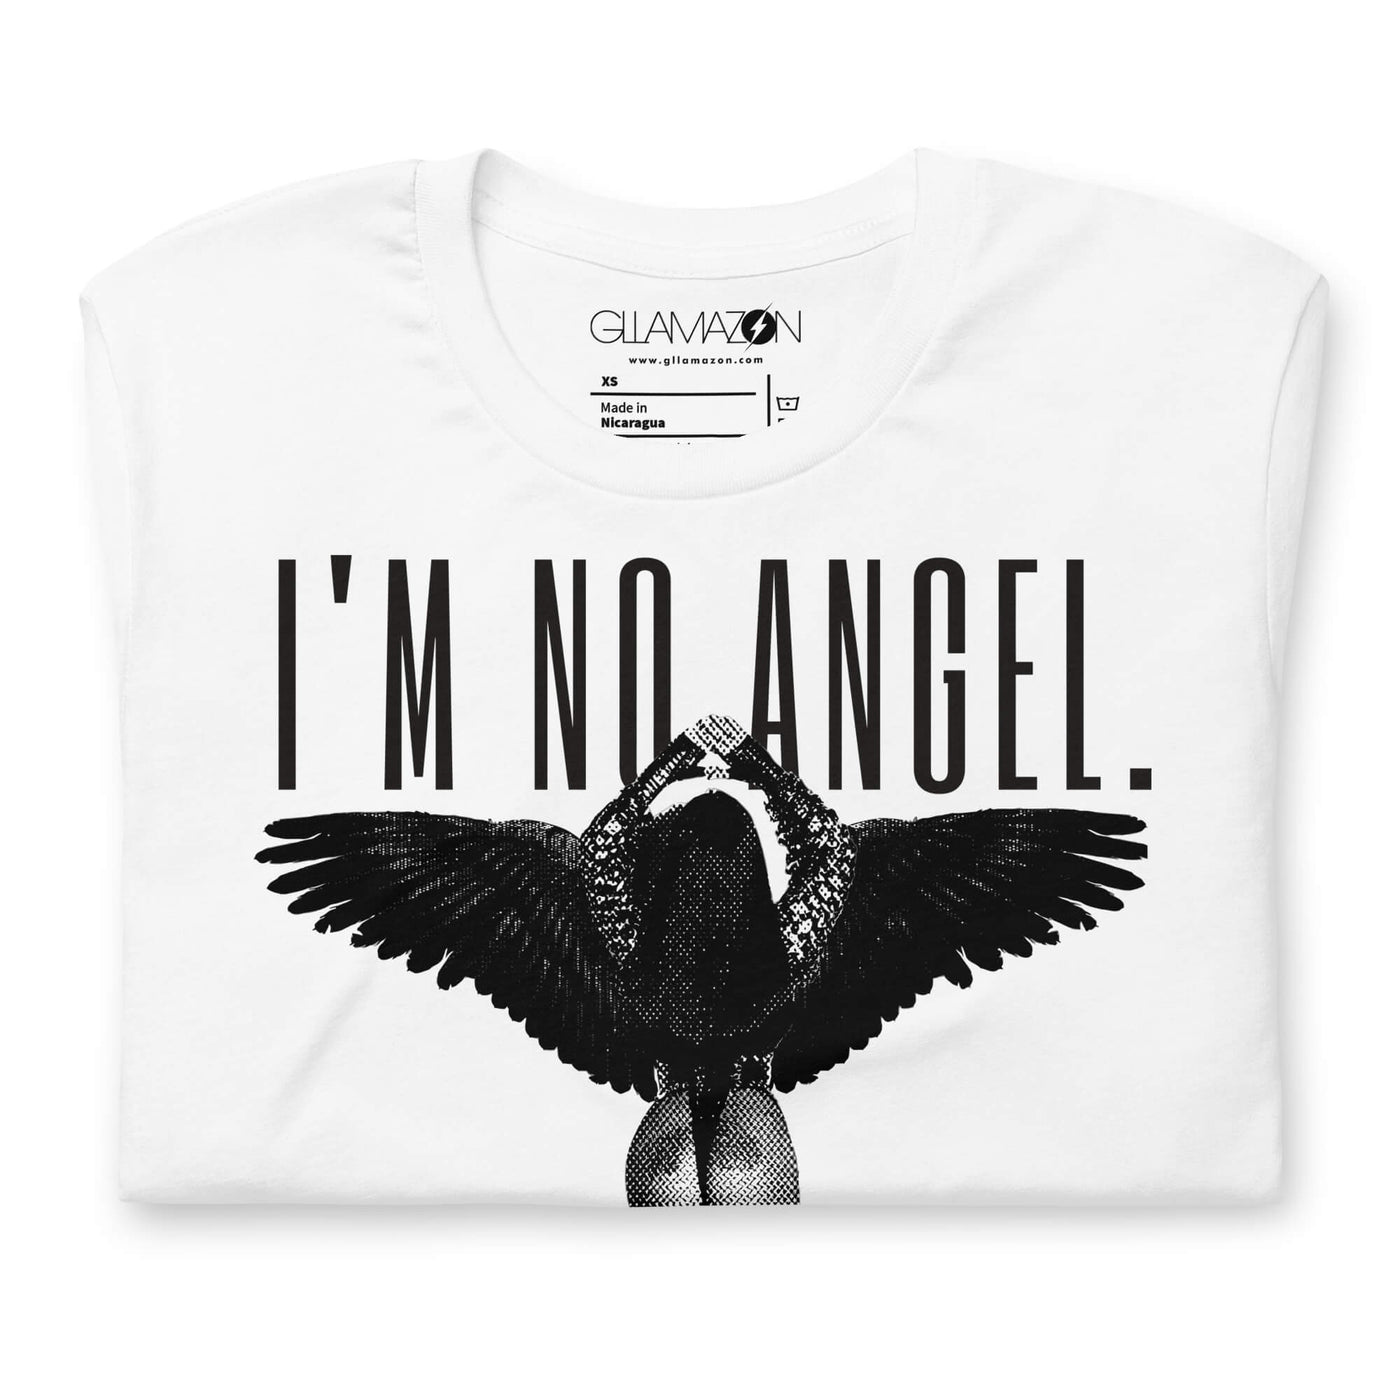 A white unisex graphic t-shirt with a 'Cher Gregg Allman I'm No Angel' design by Gllamazon, presented in a front view with the shirt folded.